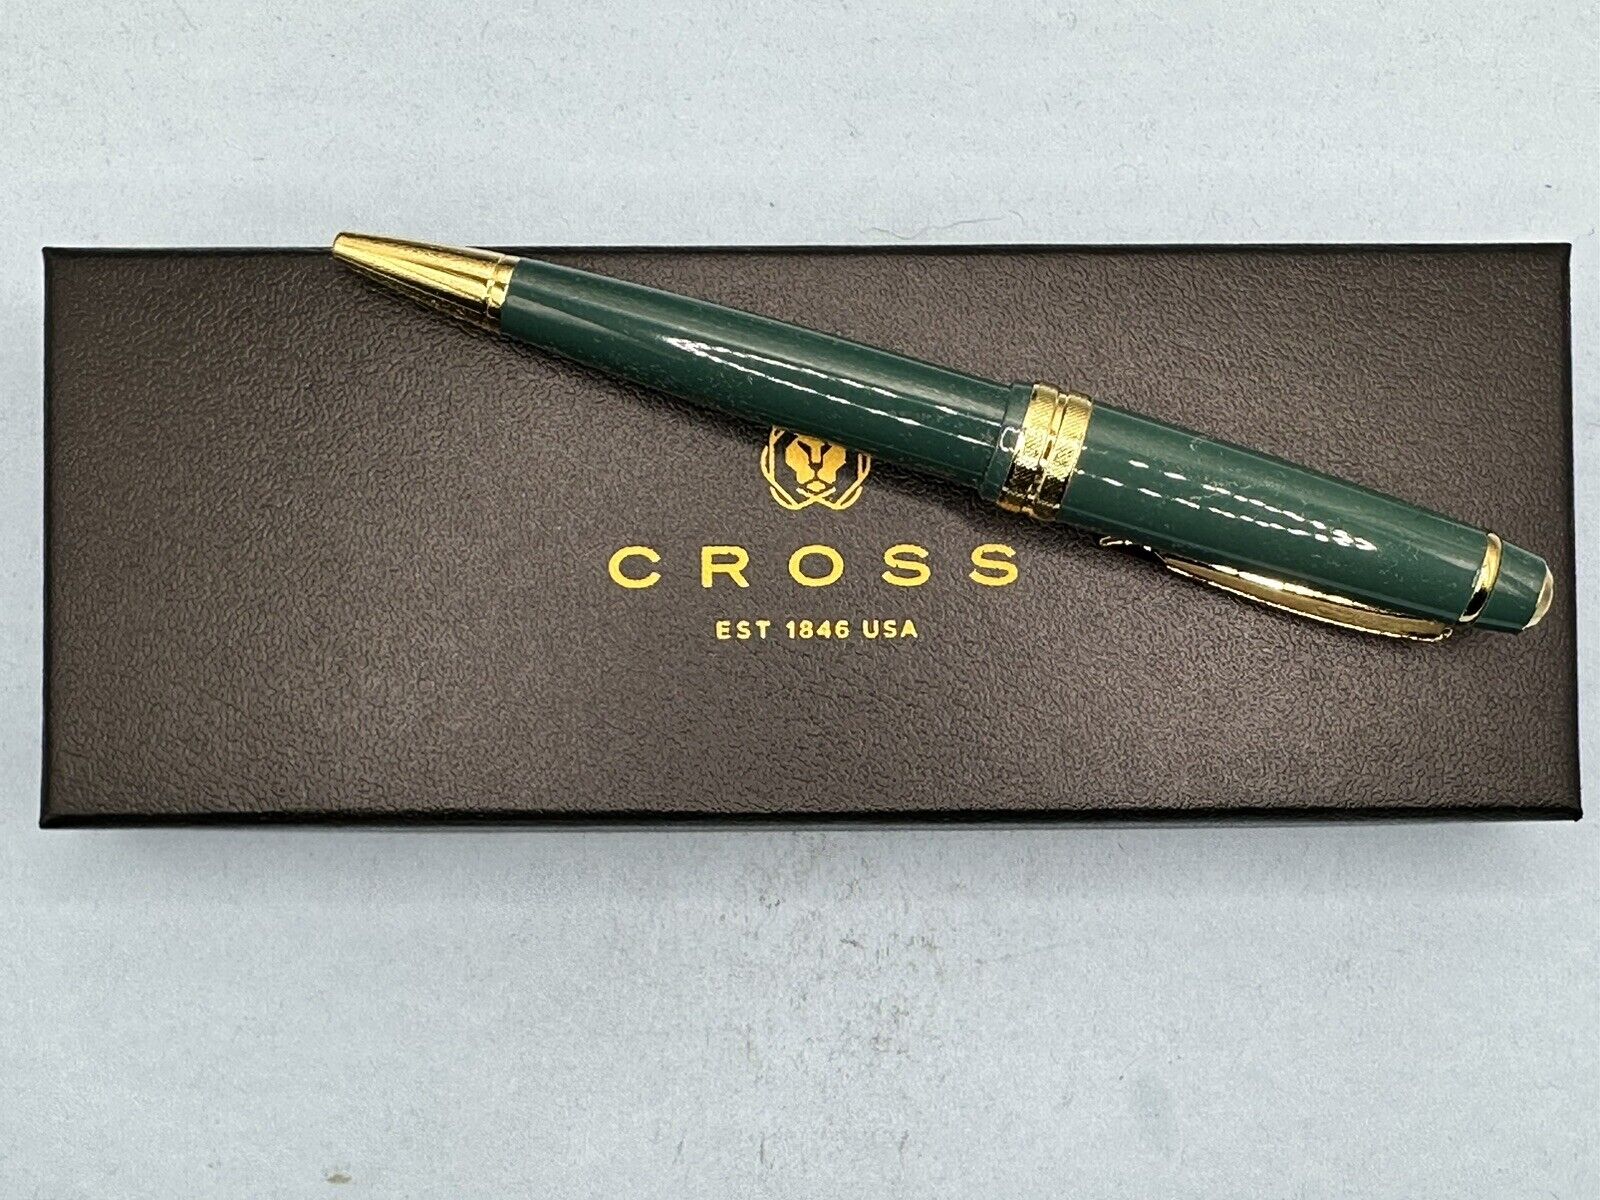 Cross Bailey Light Green Polished Resin & Gold Tone Ballpoint Pen NEW AT0742-12